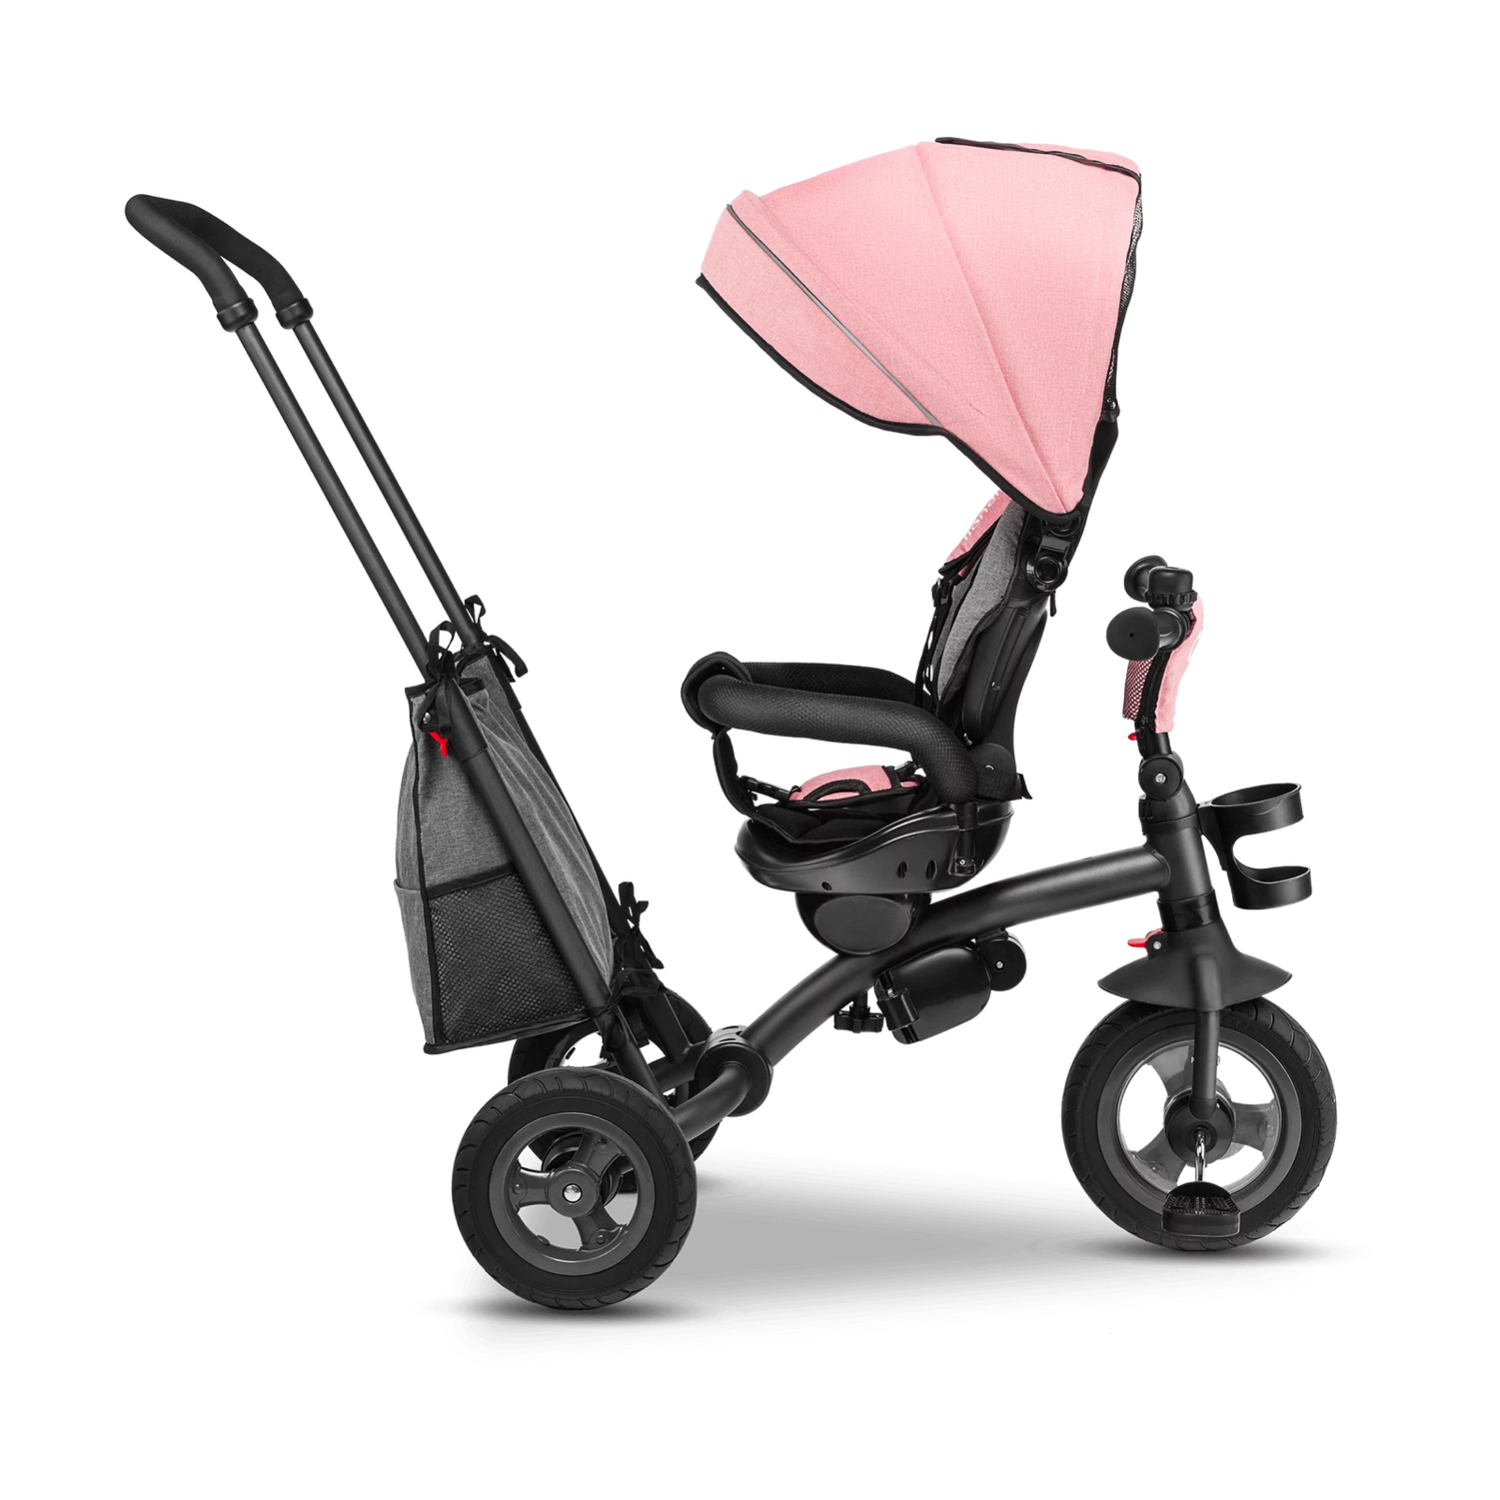 Bike Stroller Tricycle With Bag Lionelo Tris Candy Rose/Grey 2 In 1